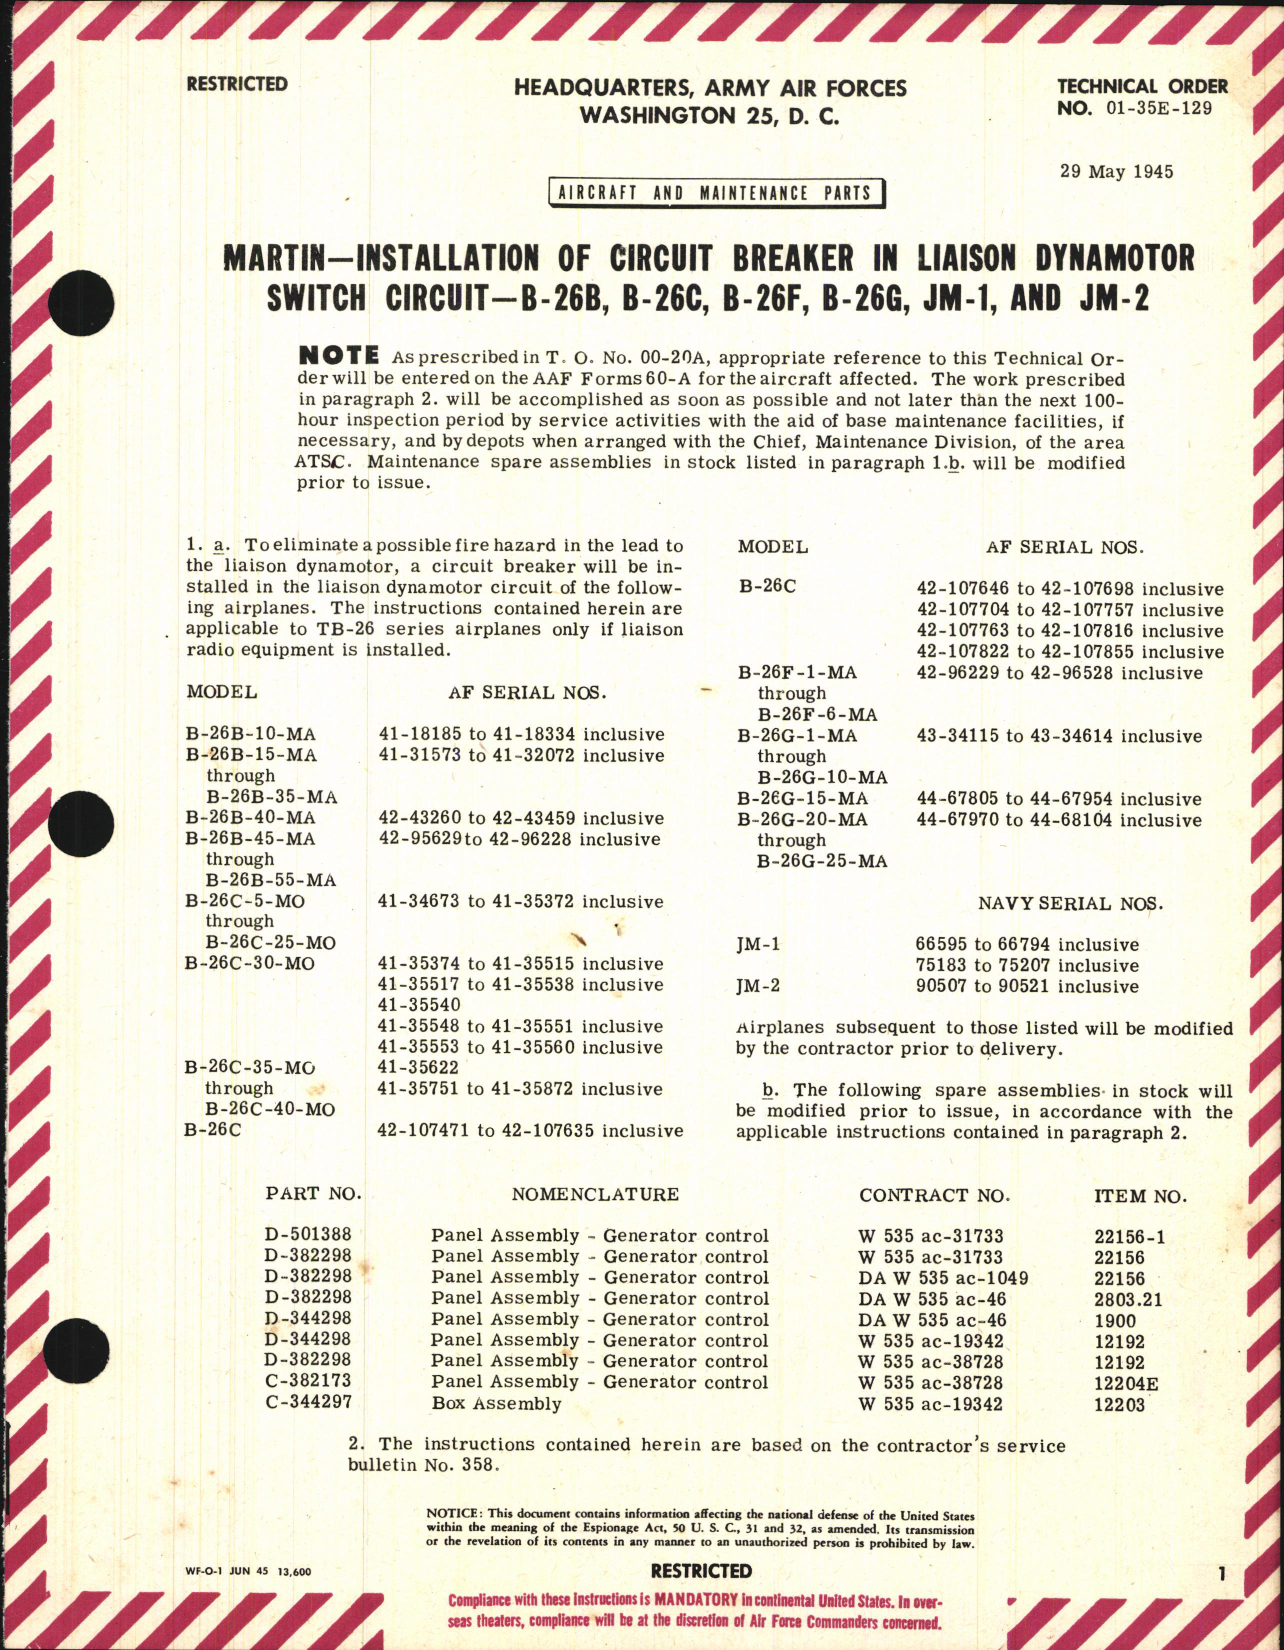 Sample page 1 from AirCorps Library document: Installation of Circuit Breaker In Liaison Dynamoter Switch Circuit for B-26B, B-26C, B-26F, B-26G, JM-1, and JM-2